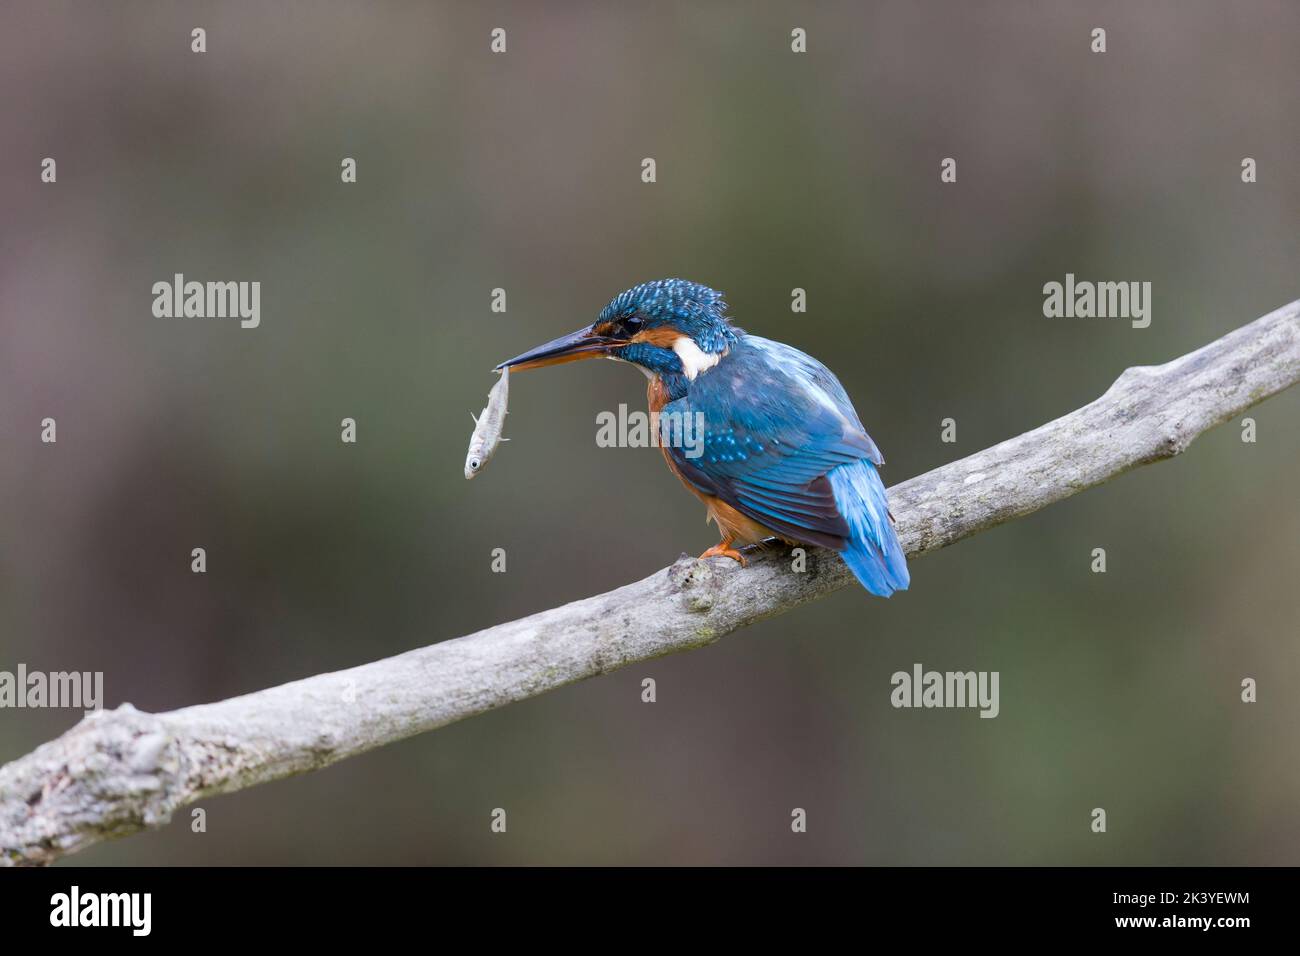 Common kingfisher Alcedo atthis, adult female perched on branch with Three-spined stickleback Gasterosteus aculeatus, prey in beak, Suffolk, England, Stock Photo